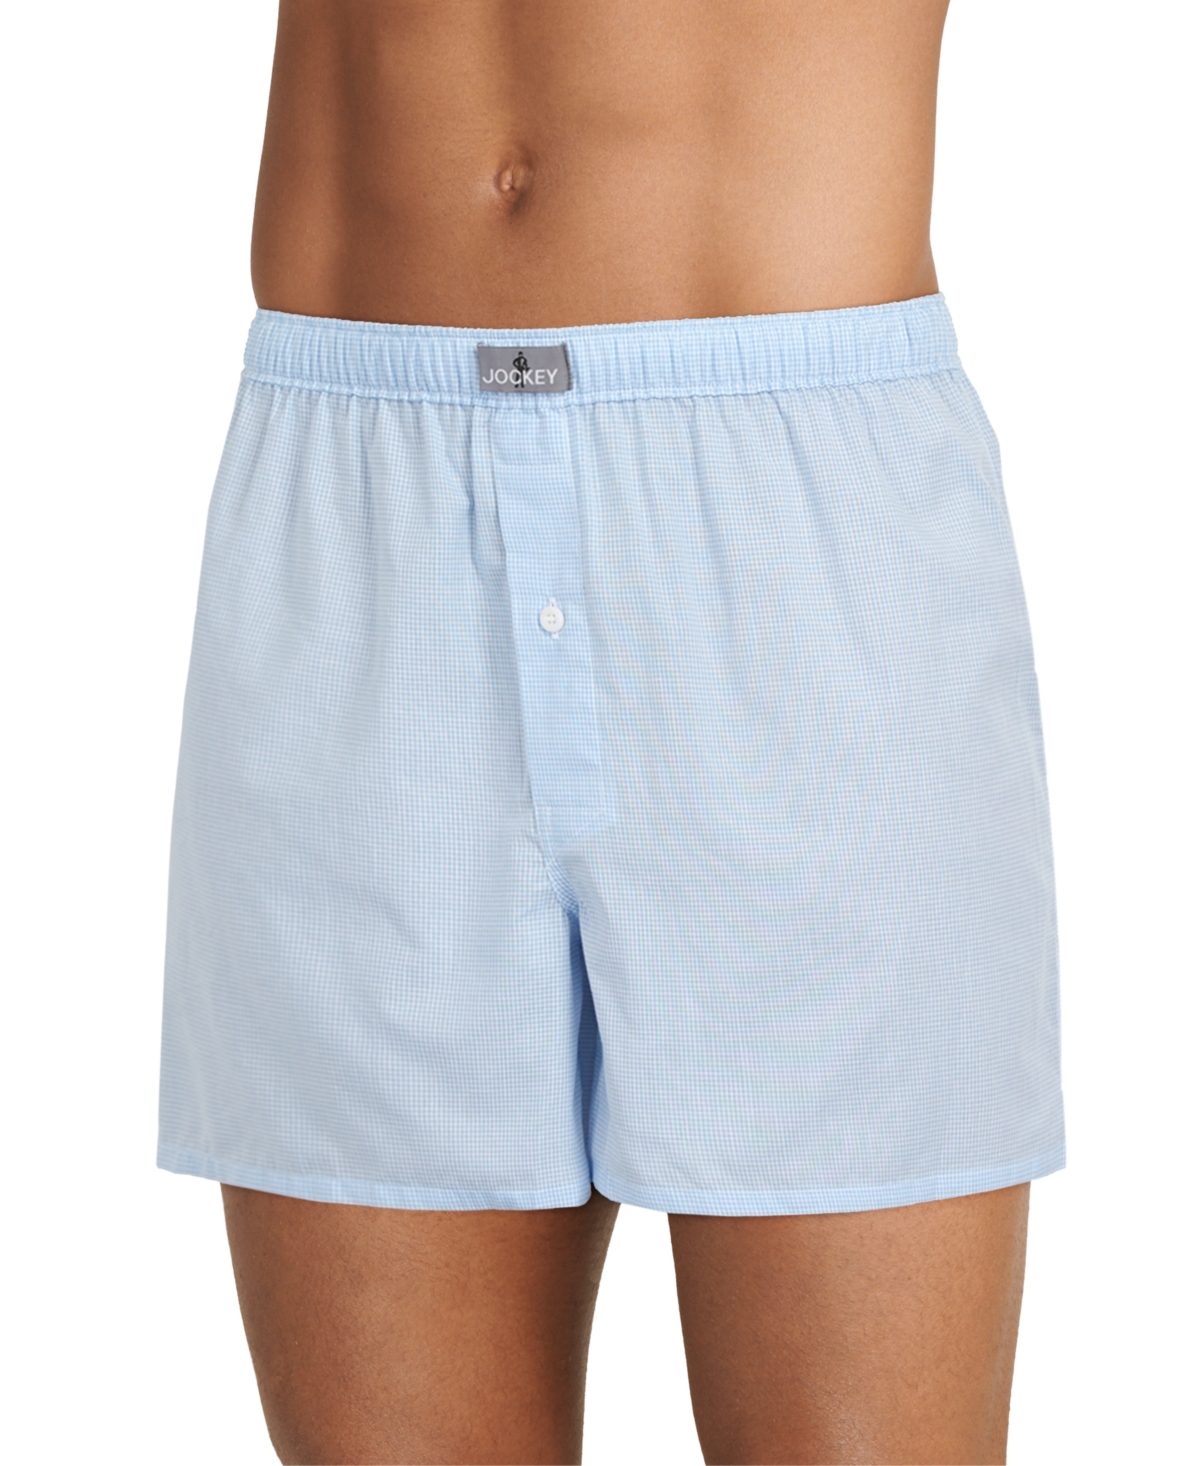 Jockey Men's Relaxed-Fit Cotton Boxers